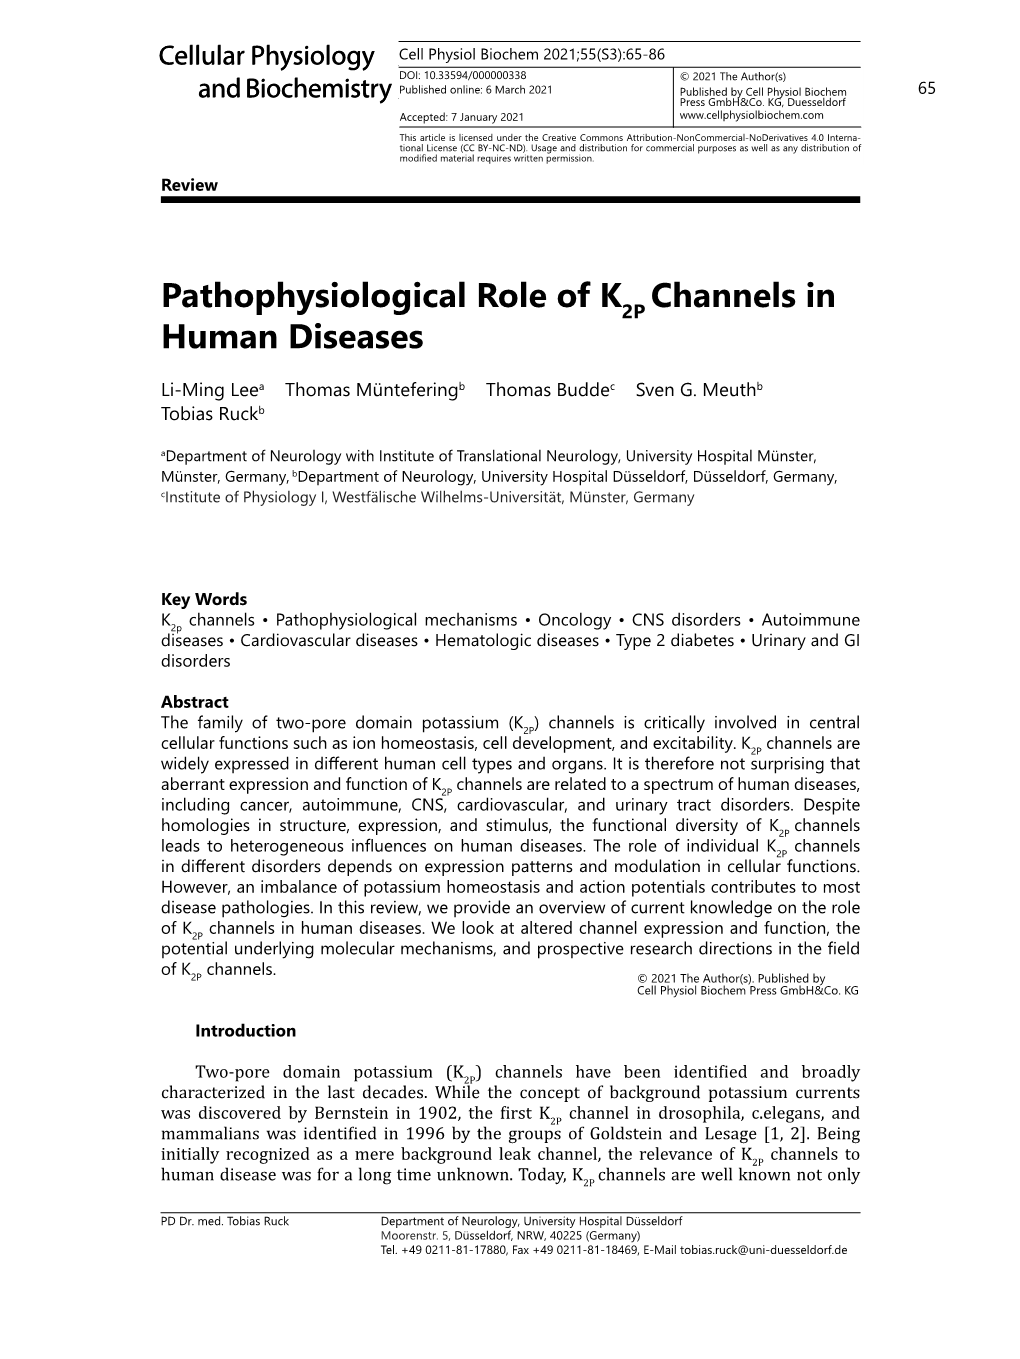 Pathophysiological Role of K Channels in Human Diseases